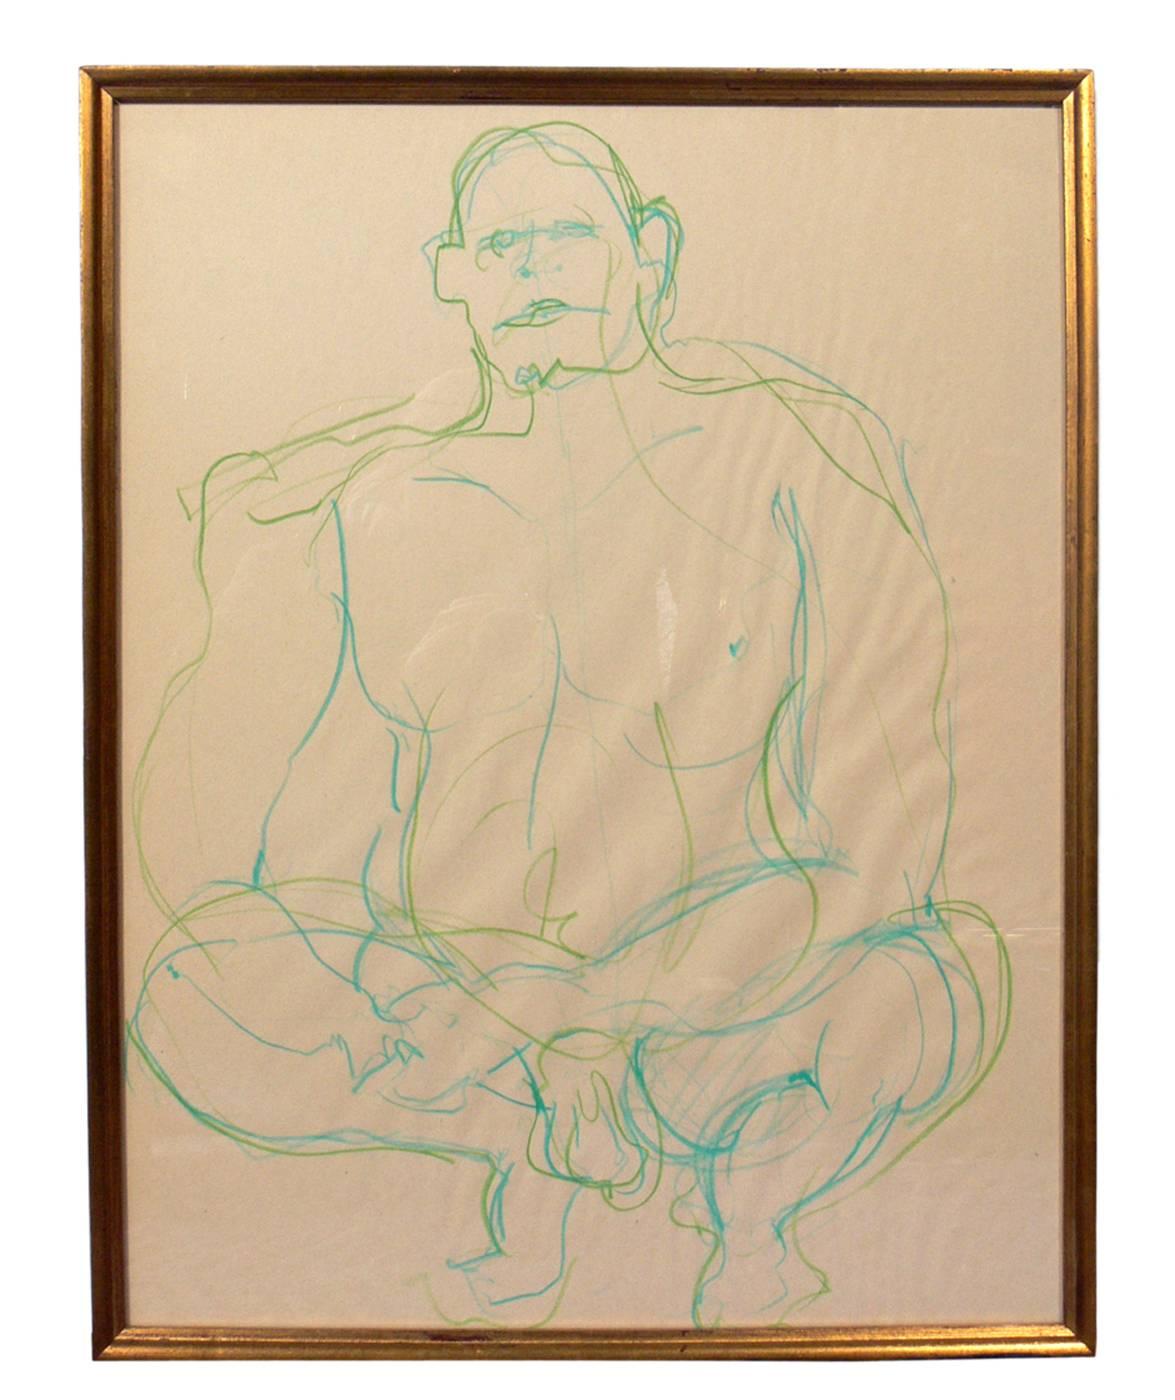 Selection of Modern Art or Gallery Wall, circa 1960s. 
From left to right they are:
1) Watercolor of male nude on blue paper, circa 1960s. It has been SOLD.
2) Pastel drawing of male nude, circa 1960s. It measures 22.5